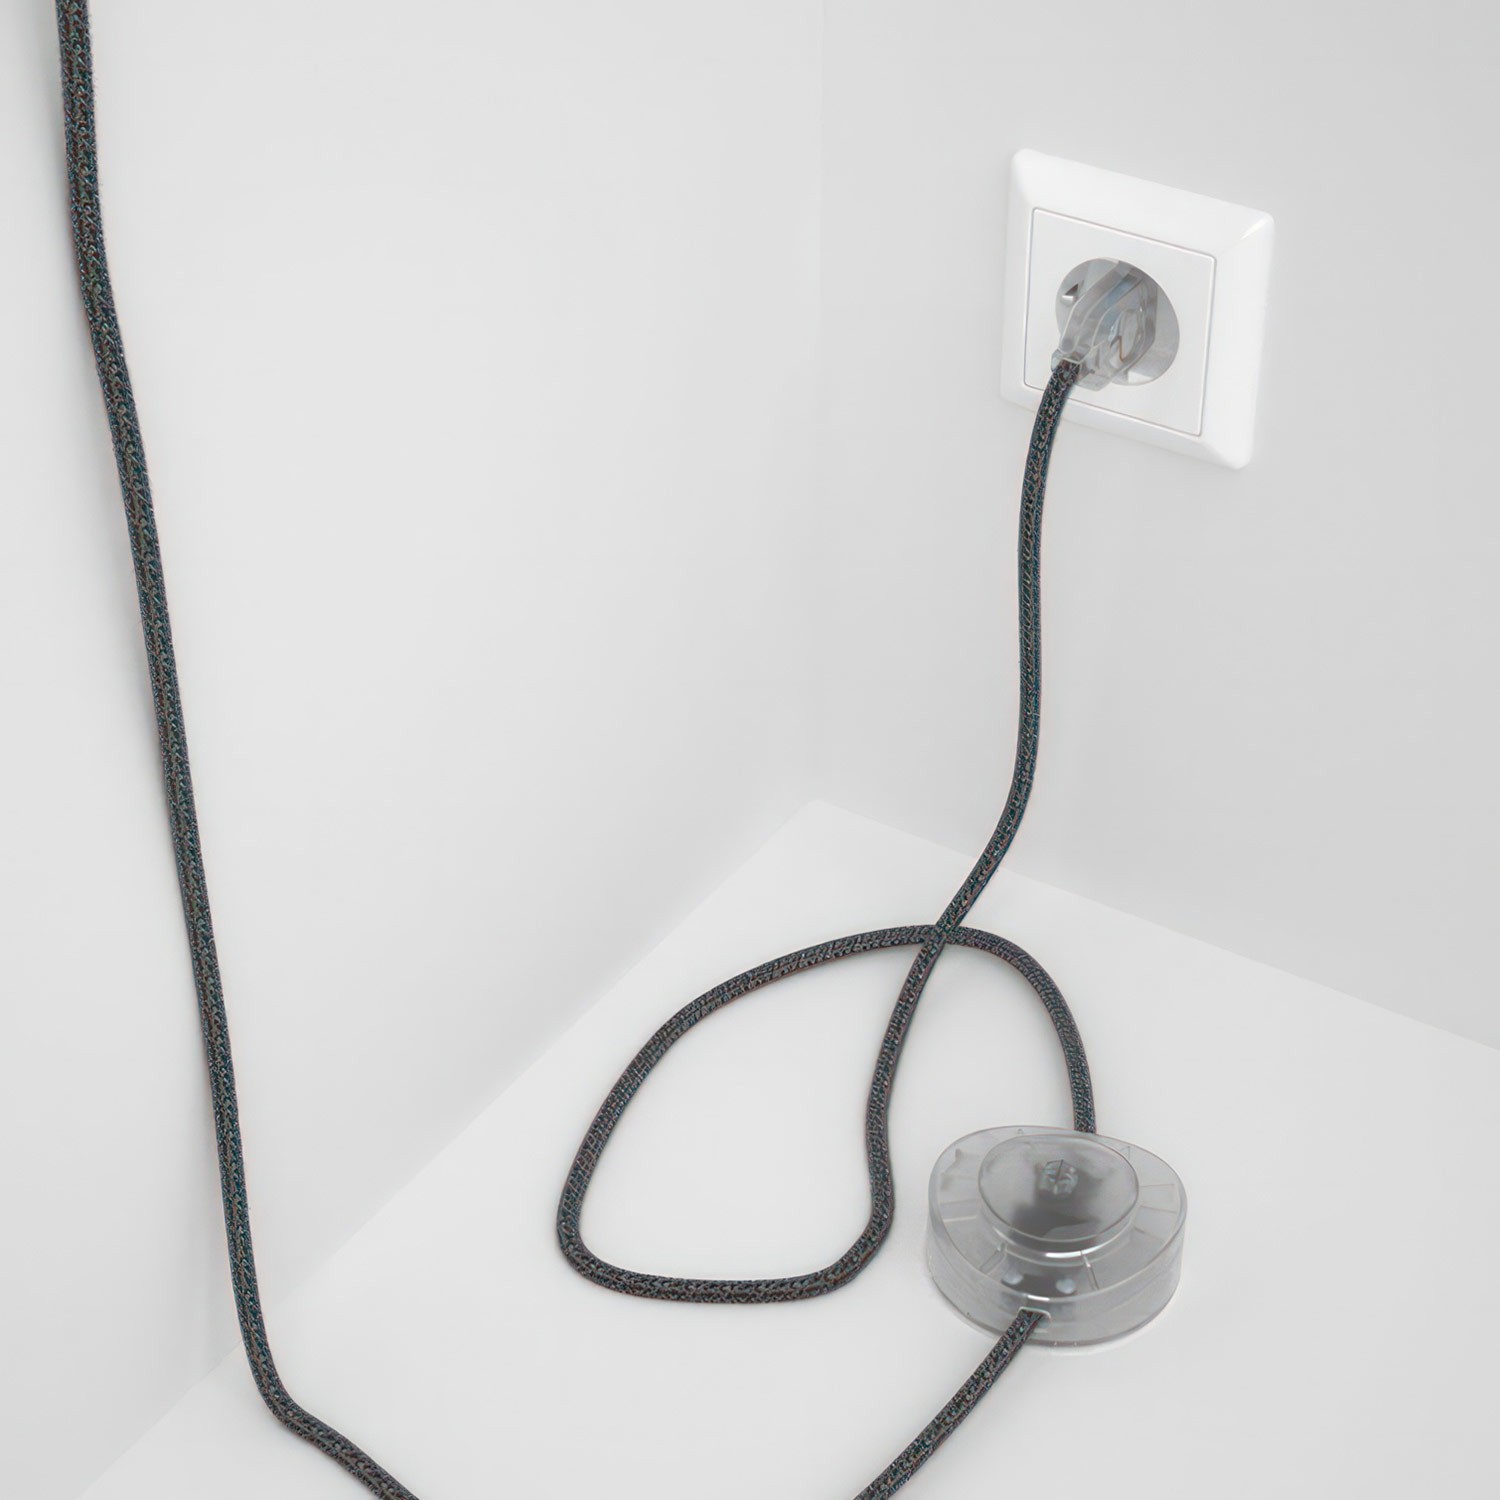 Wiring Pedestal, RS81 Black Cotton and Natural Linen 3 m. Choose the colour of the switch and plug.